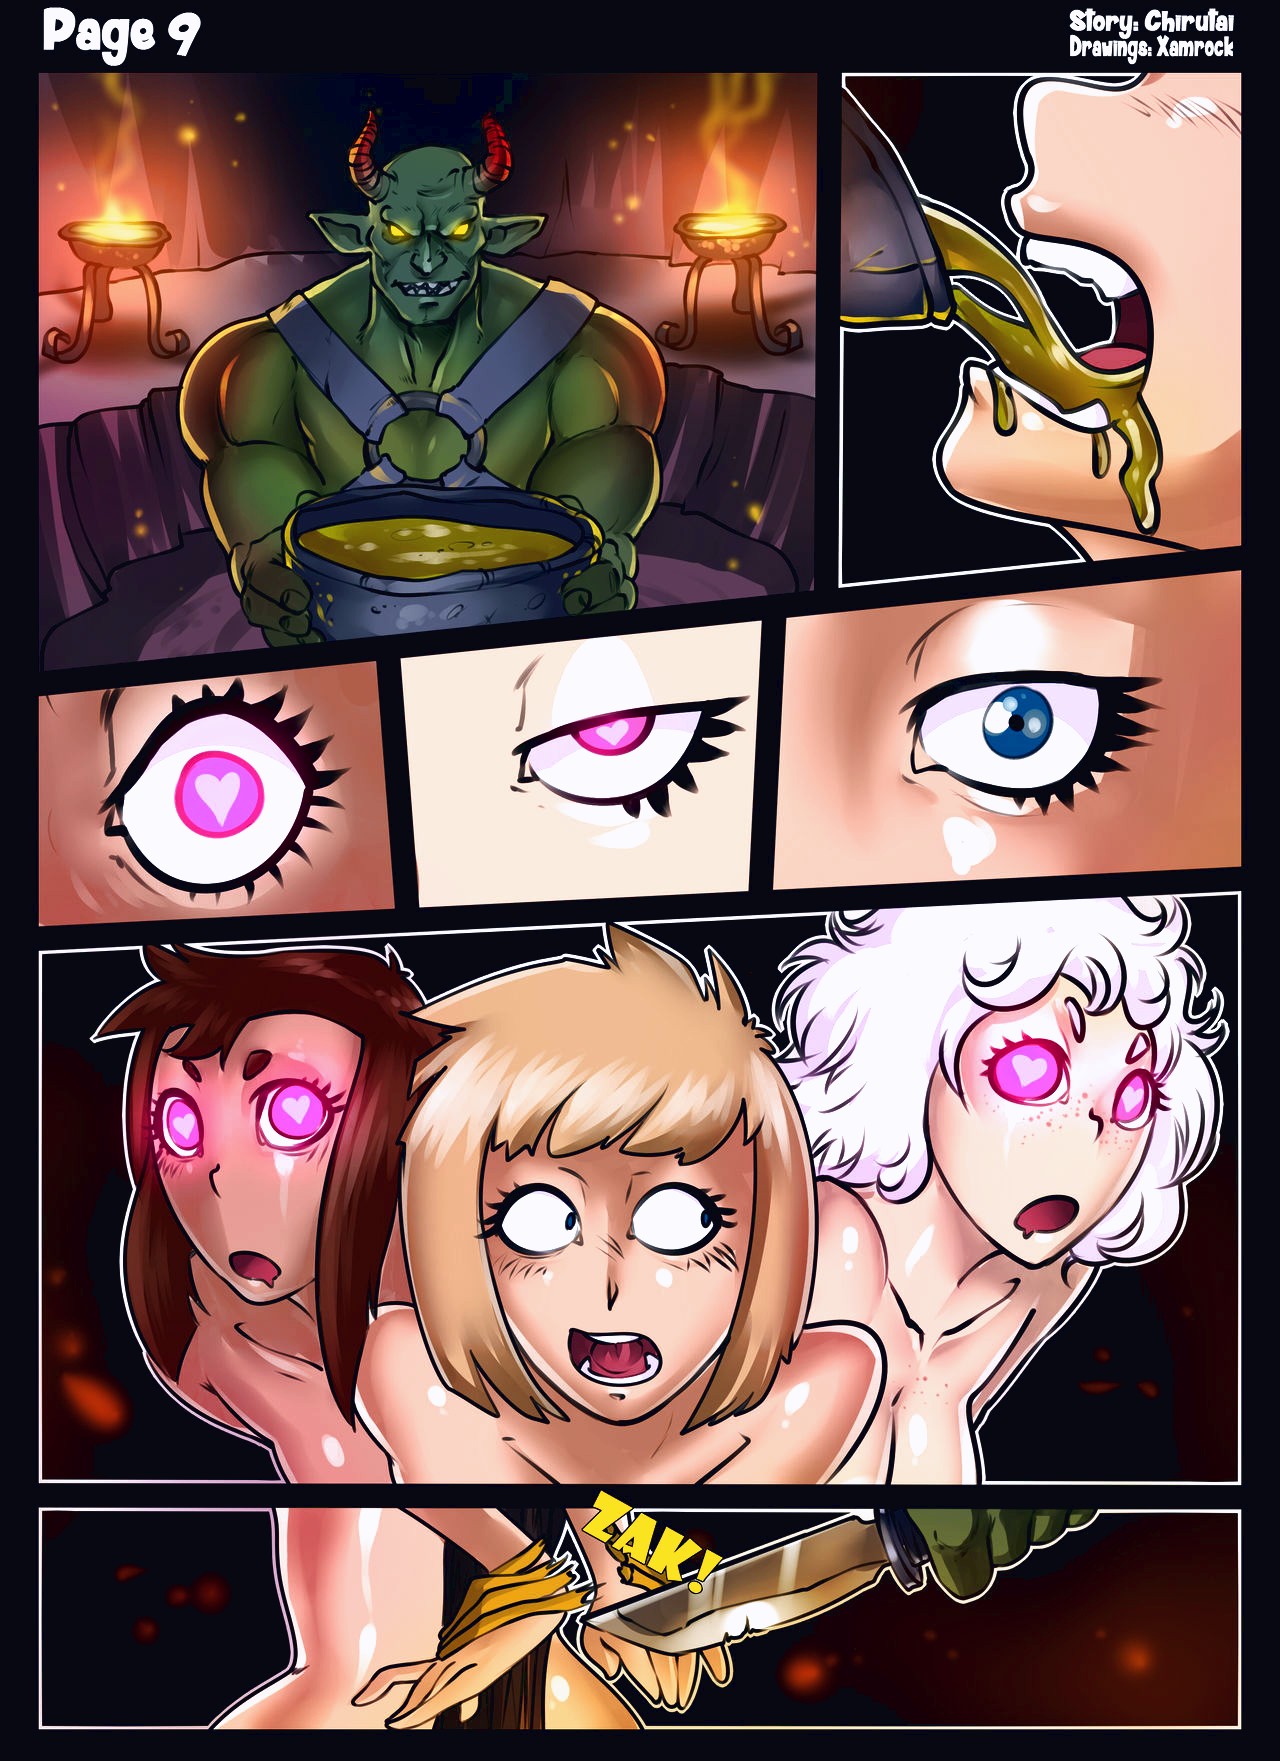 Tia in a new hell porn comic page 009